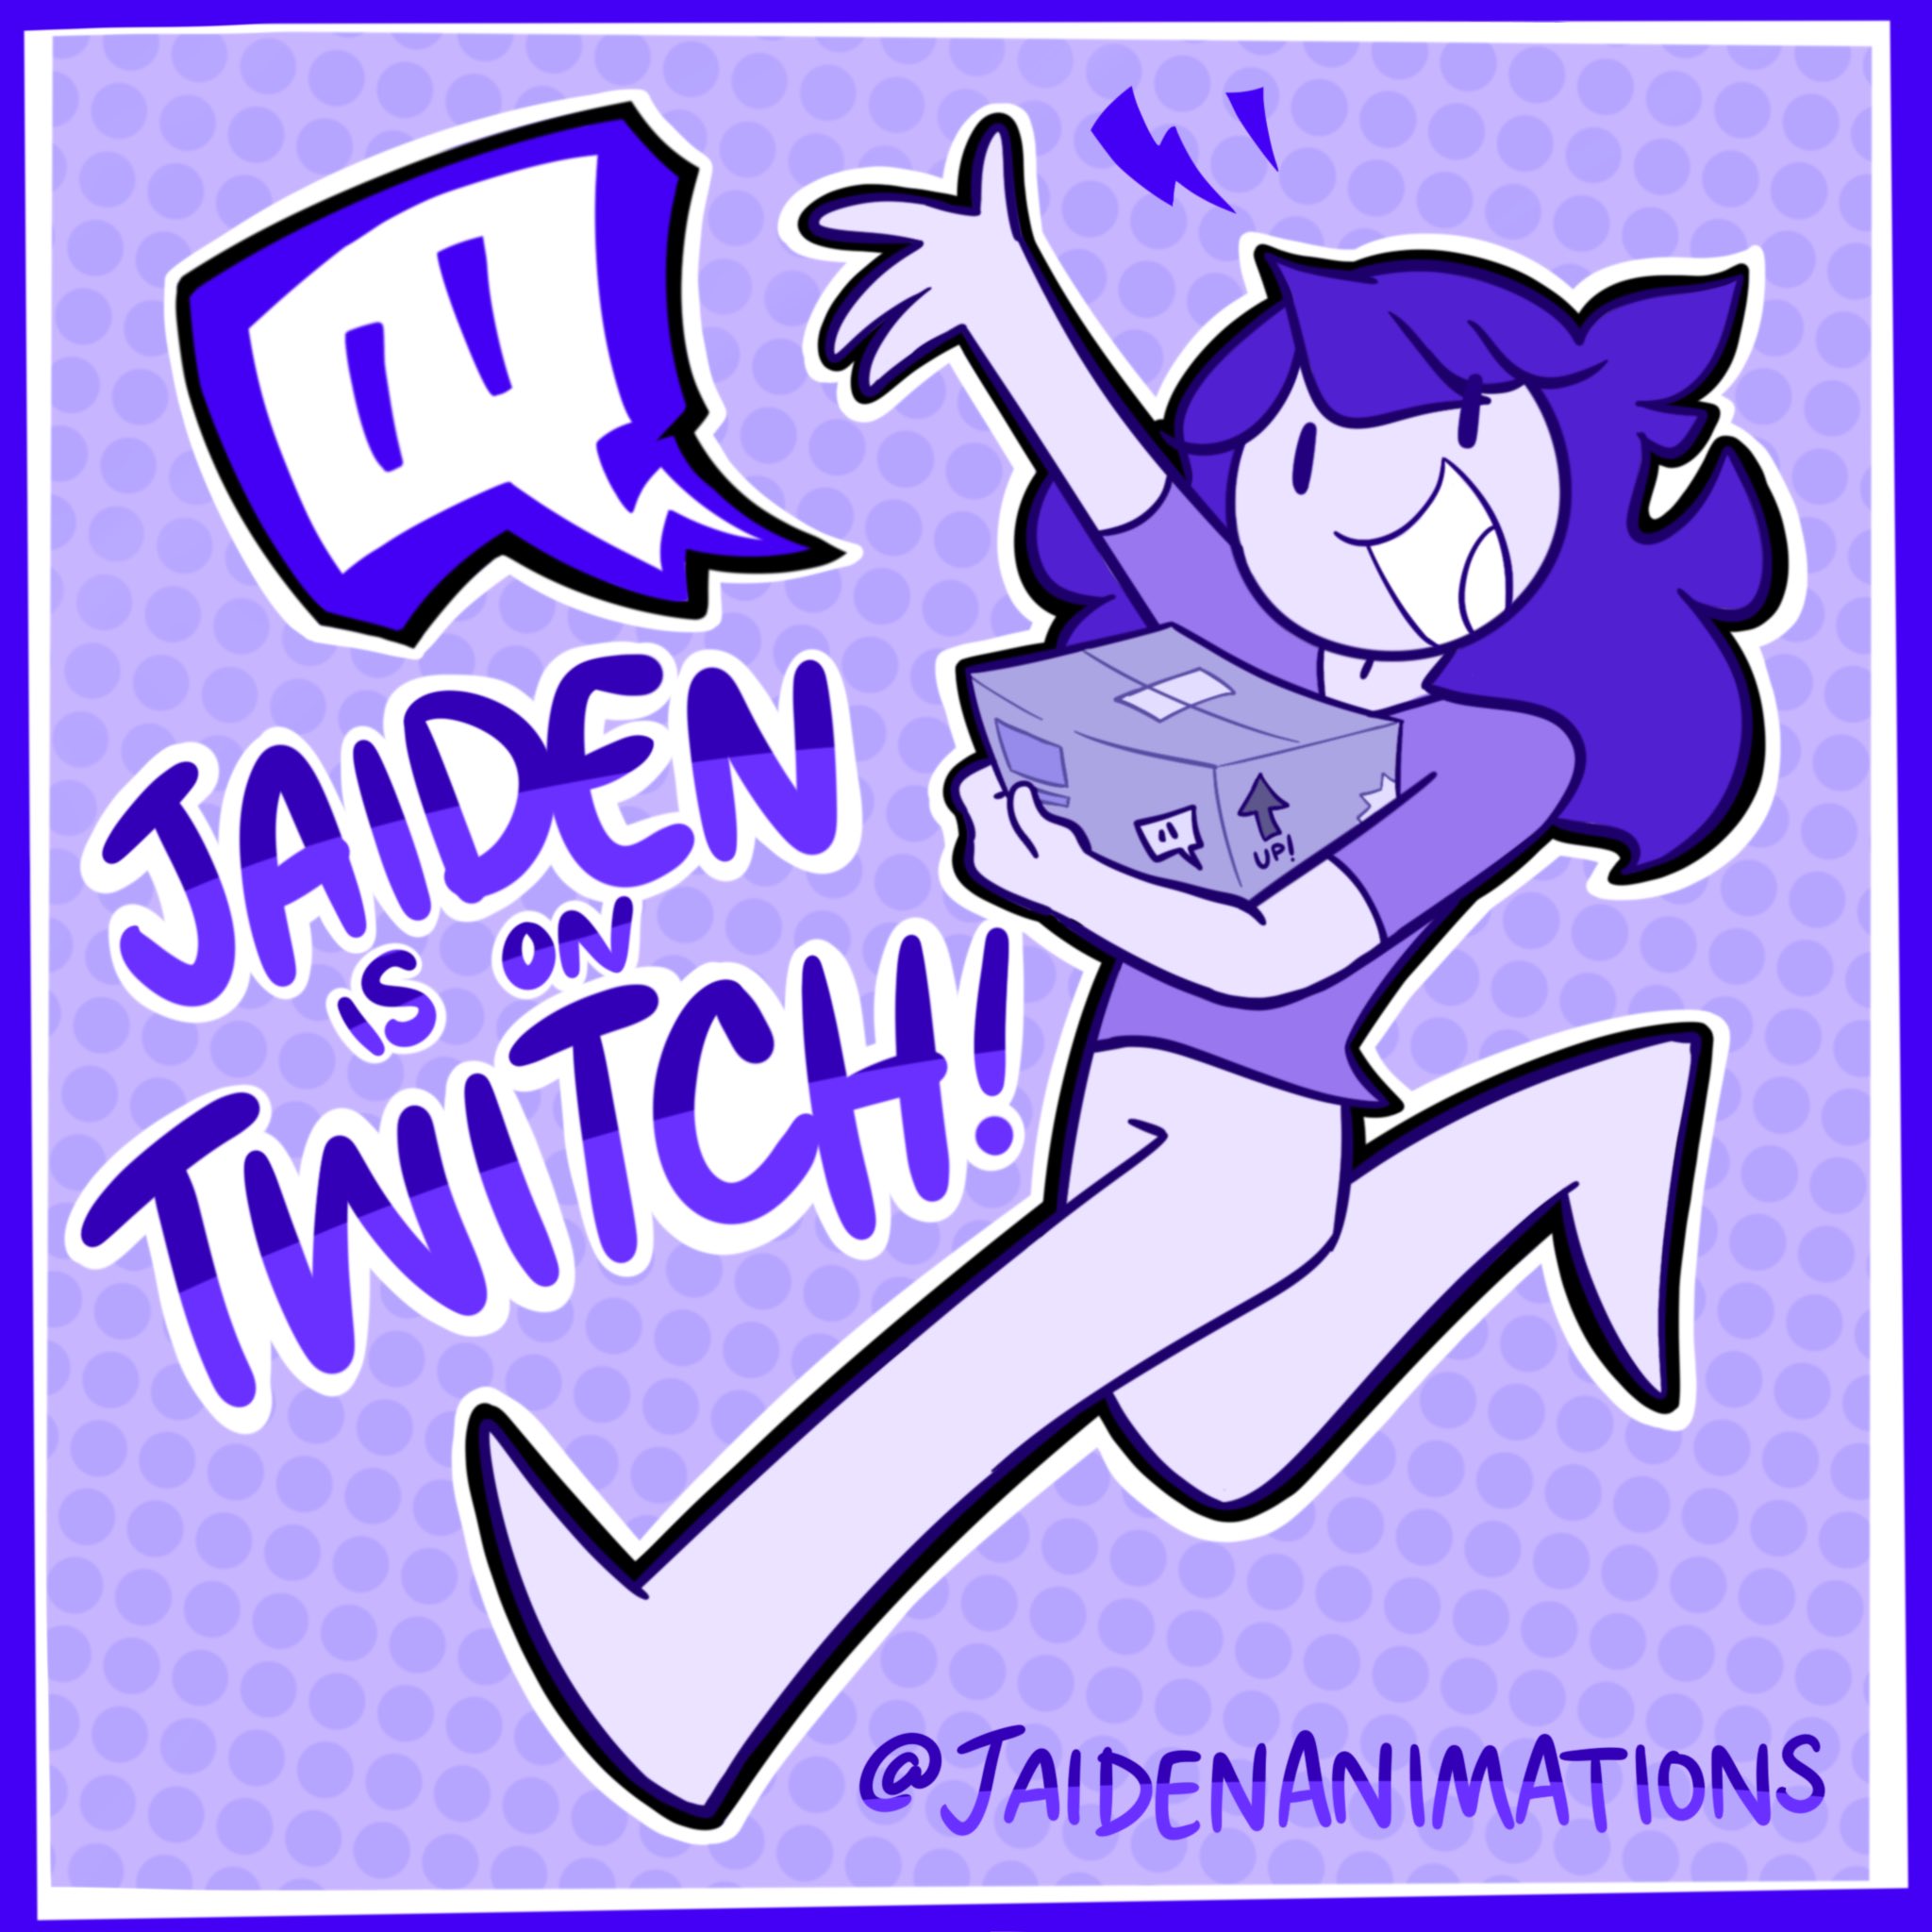 Jaiden's hosting a twitch plays but with